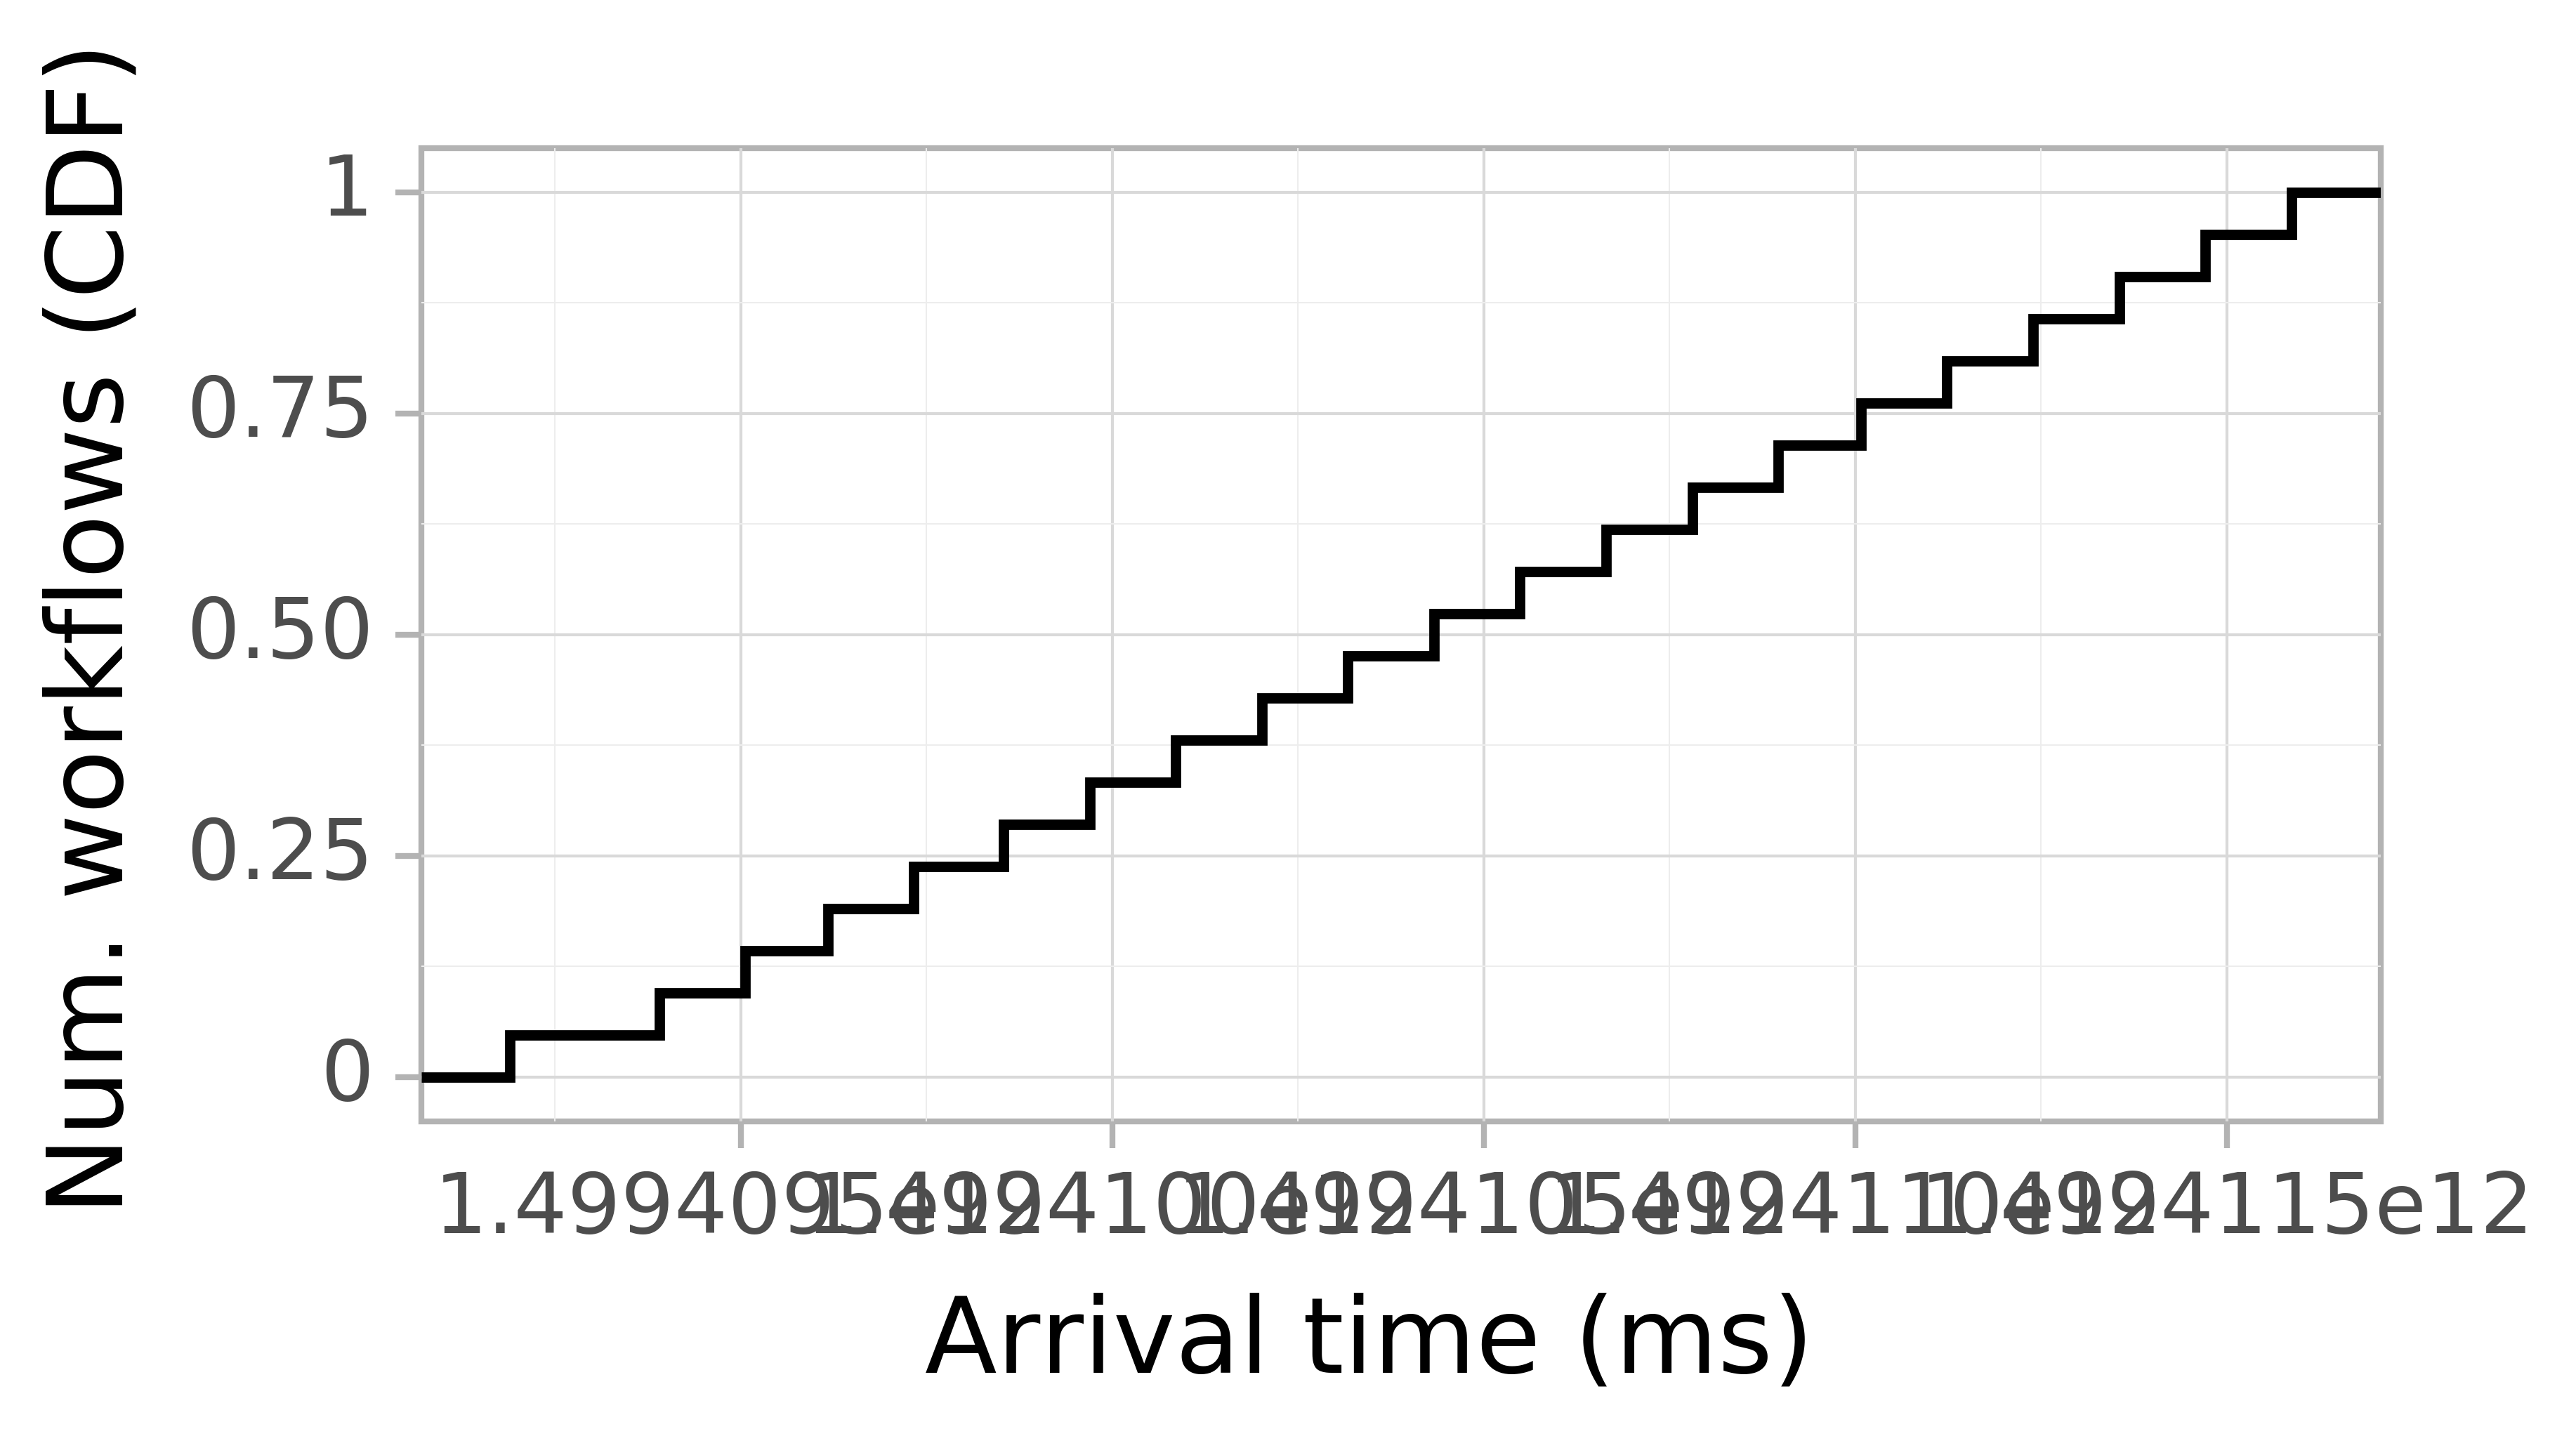 Job arrival CDF graph for the askalon-new_ee13 trace.